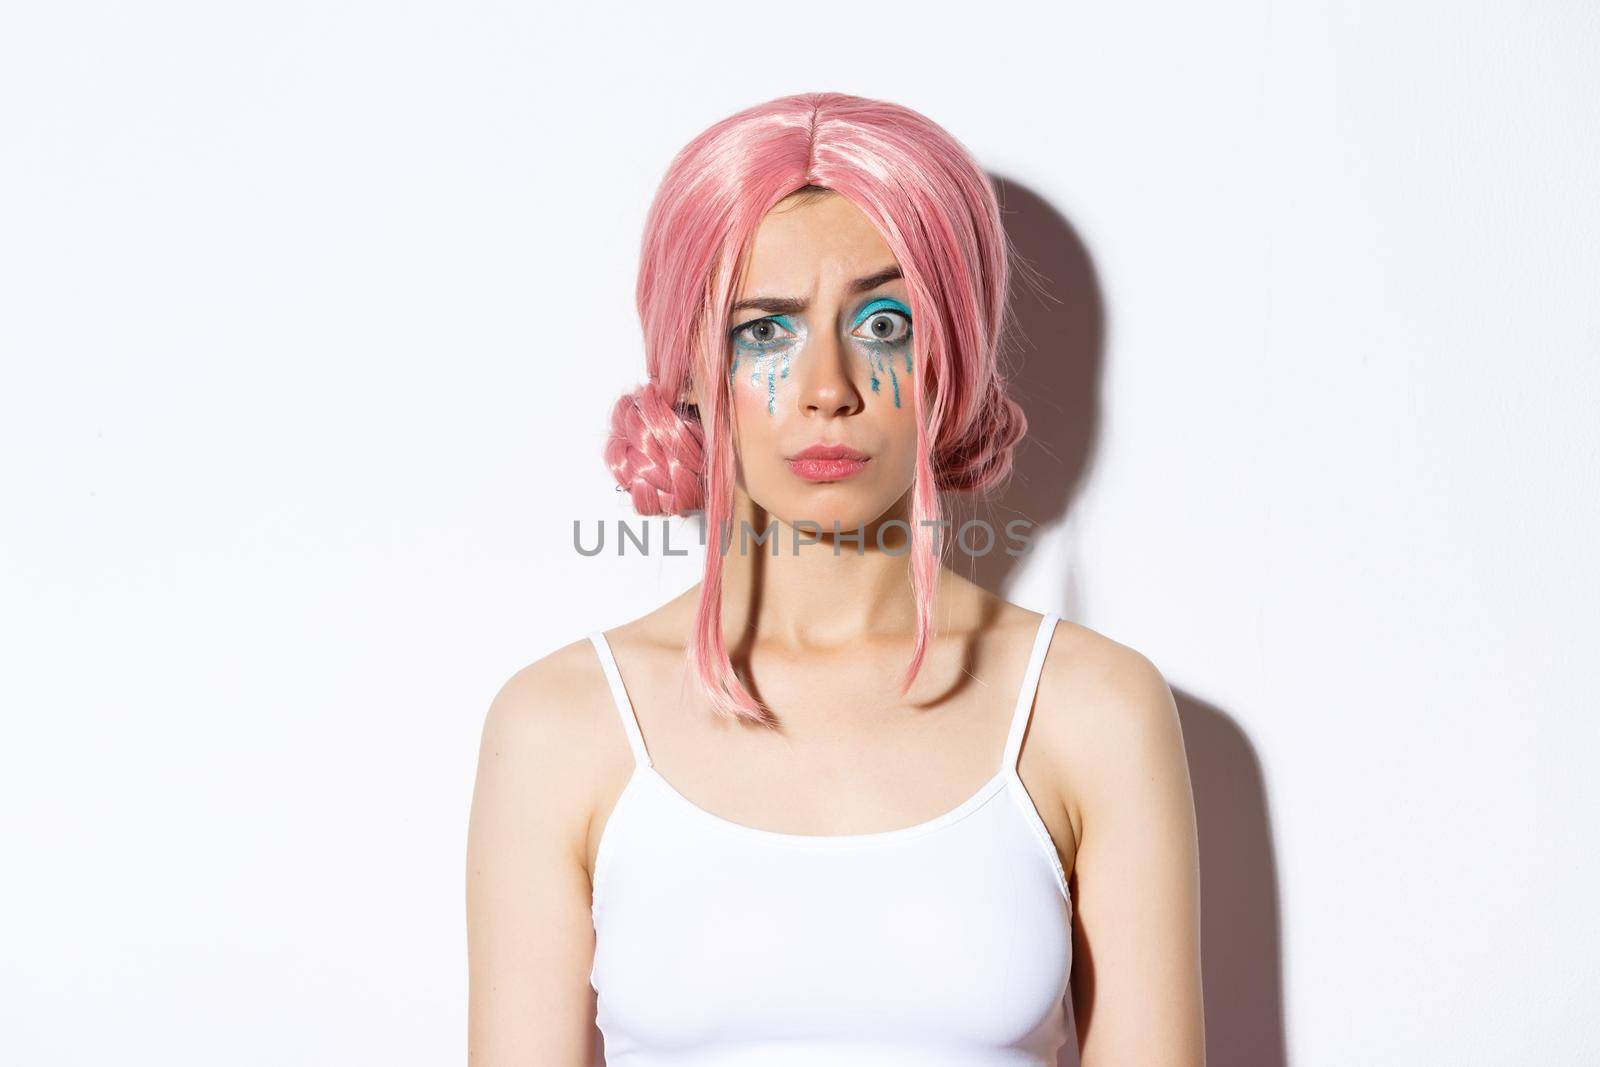 Close-up of confused girl in pink wig, raising eyebrow with suspicious expression, standing over white background.